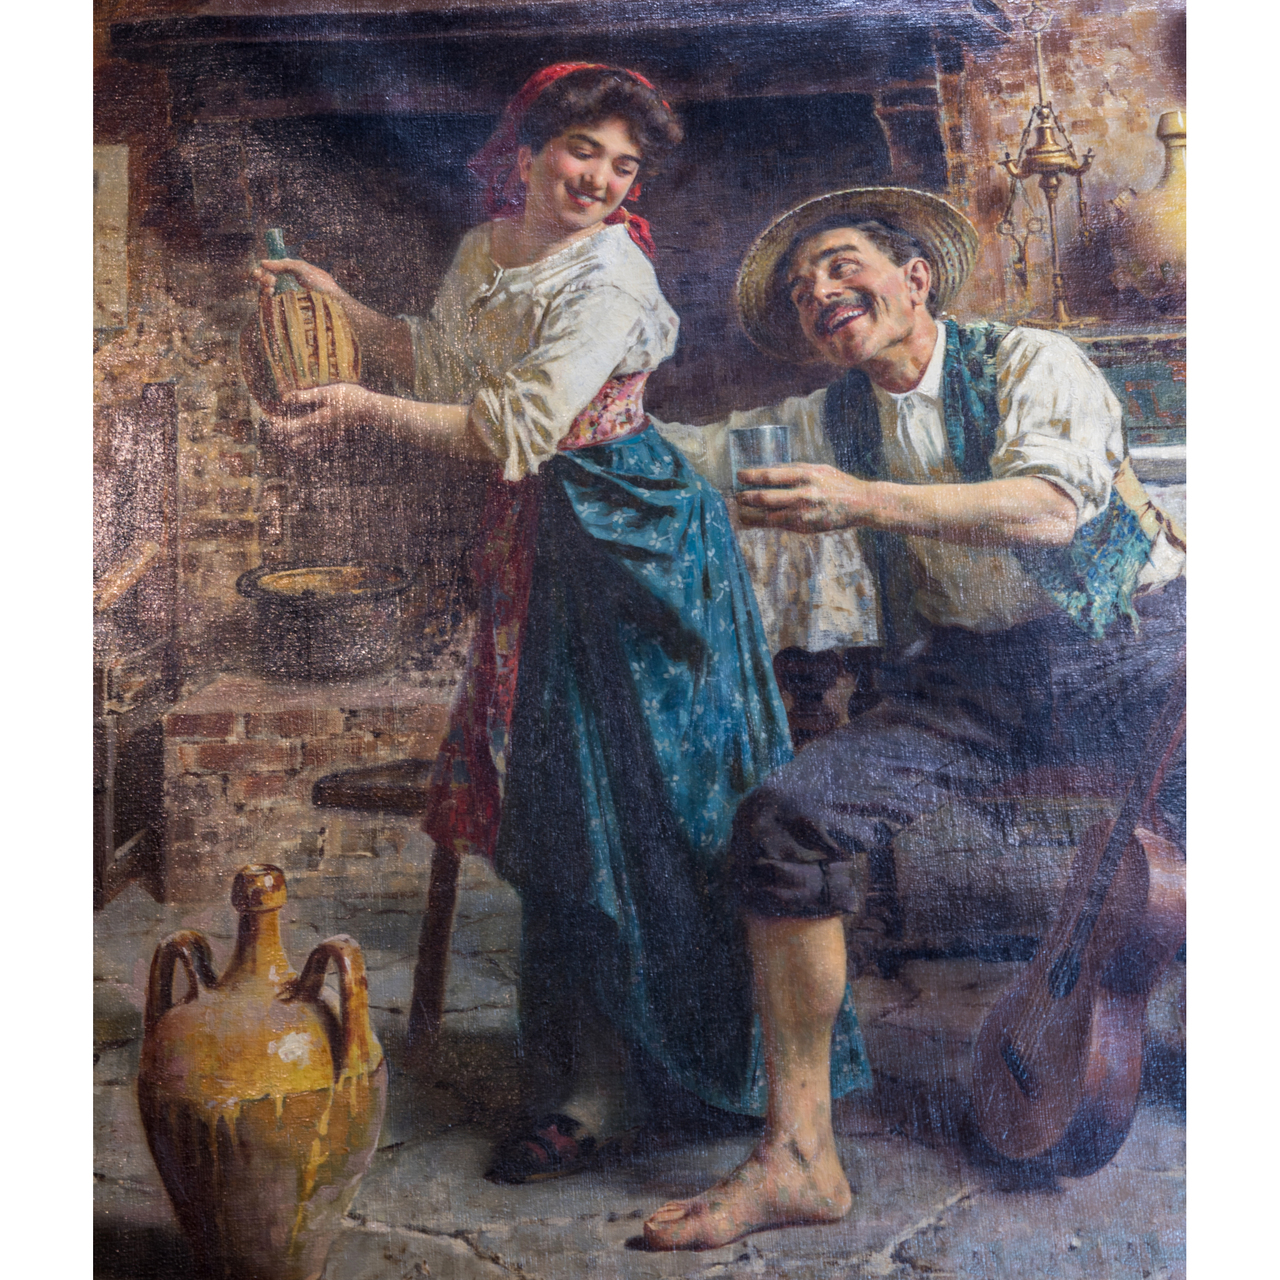 A Fine Oil Painting of a Tavern Scene By Italian Artist Eugenio